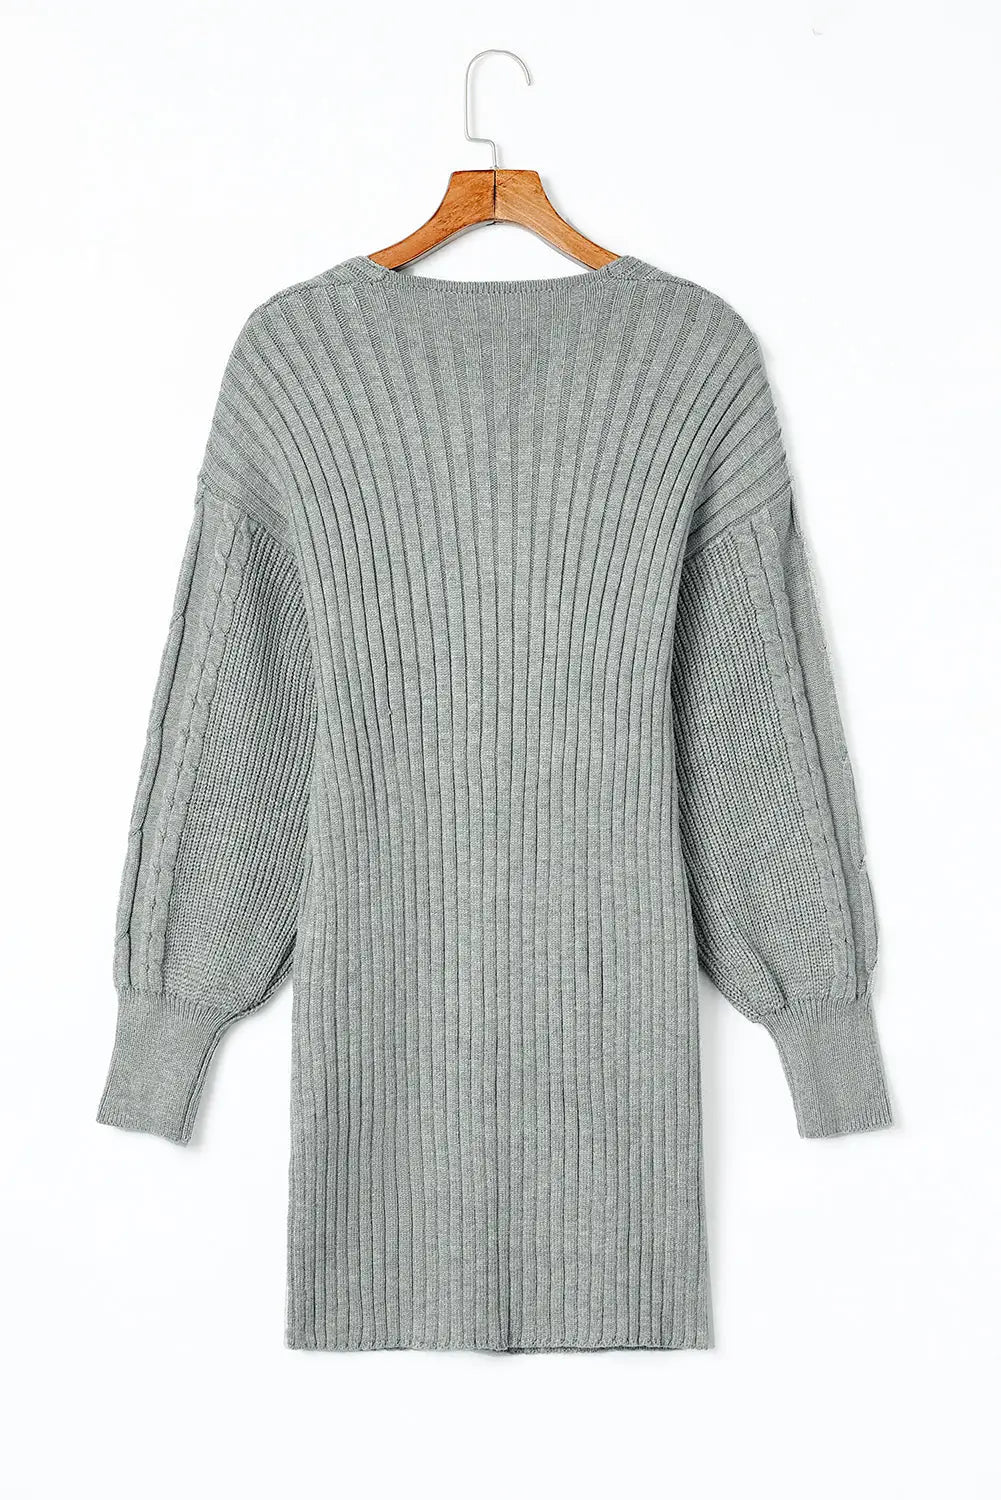 Gray cable ribbed knit v neck bodycon sweater dress - dresses